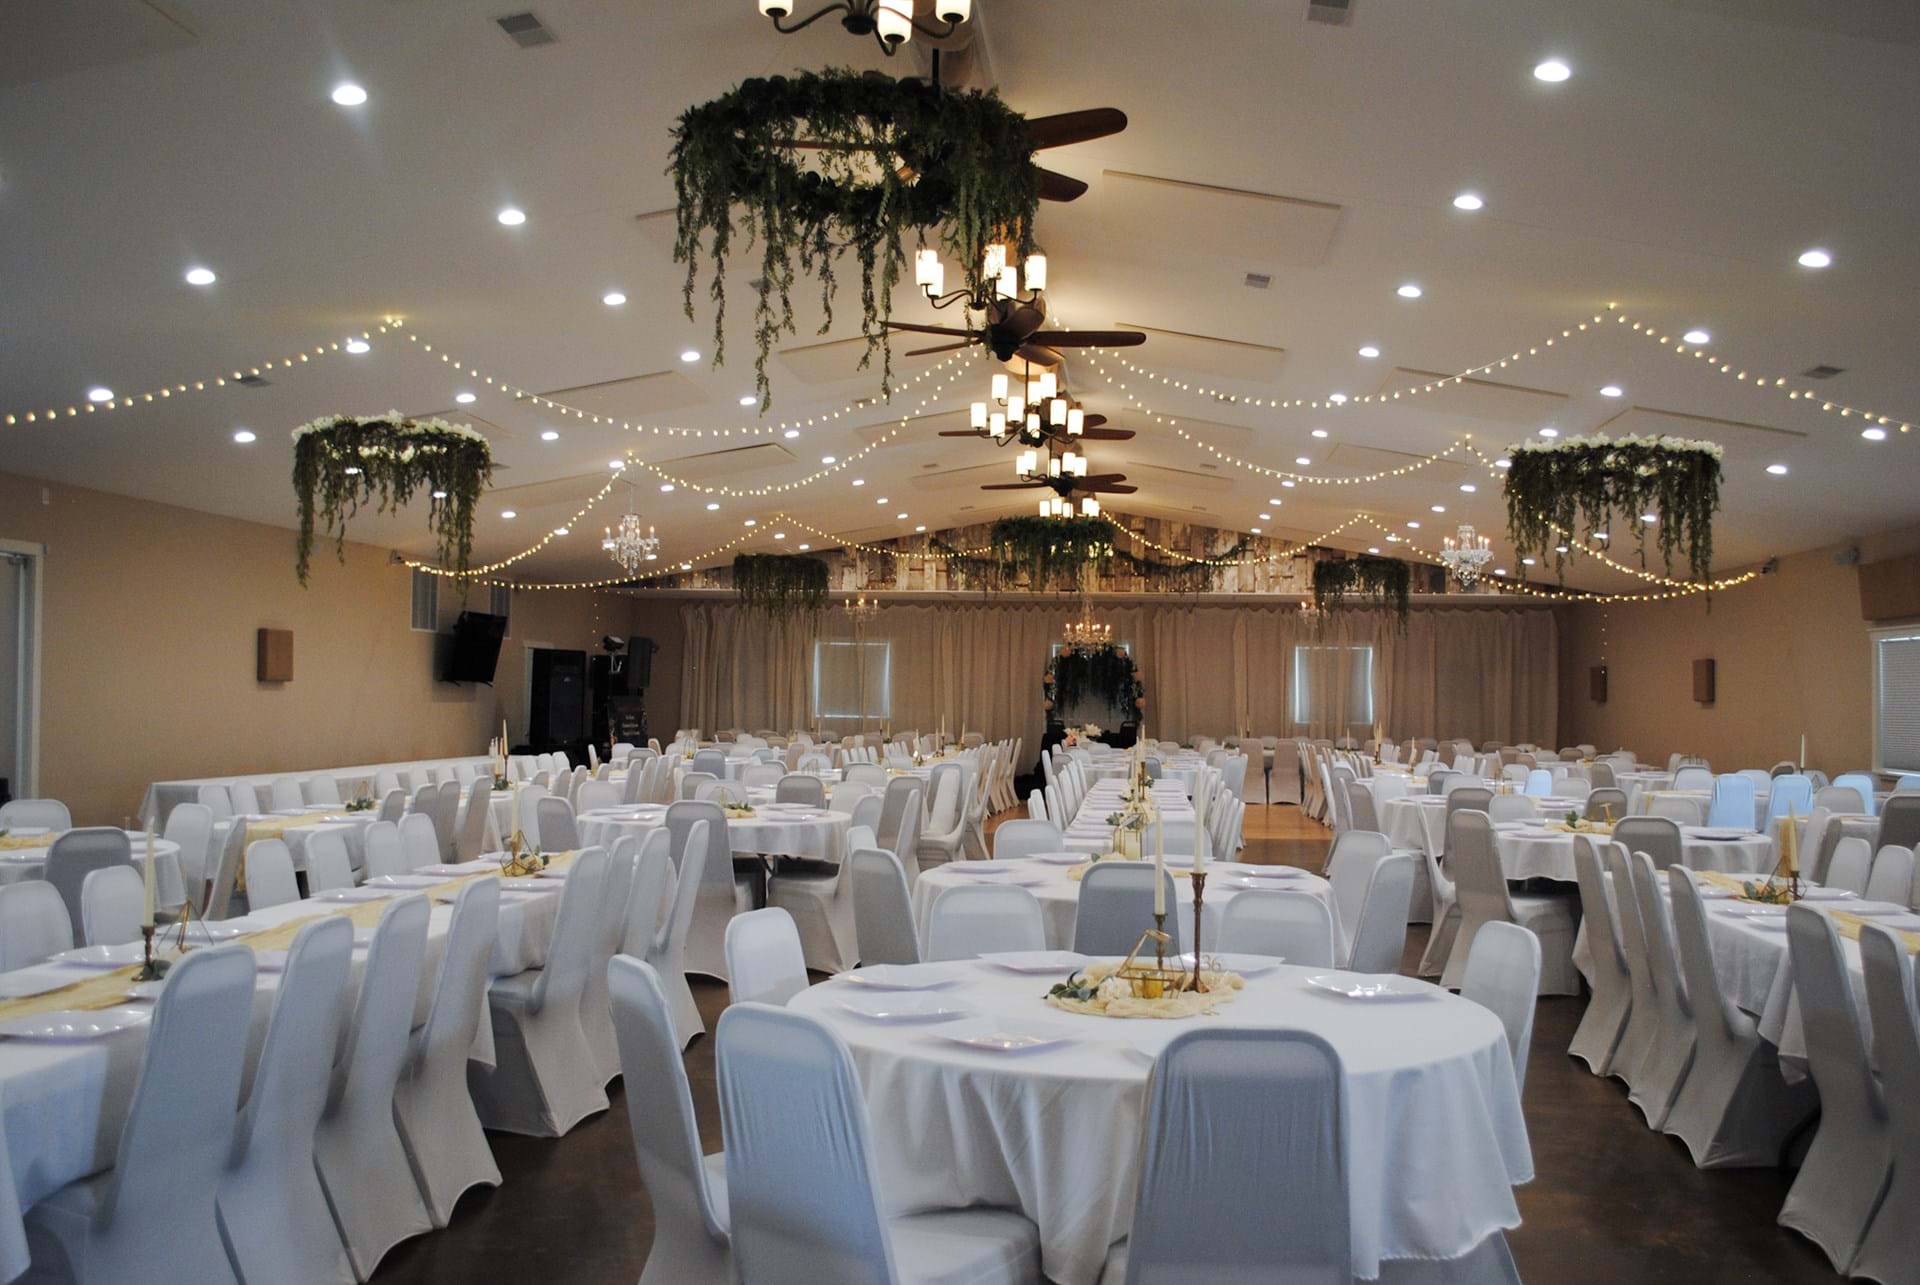 The event center is a gorgeous wedding venue. Also perfect for any occasion.